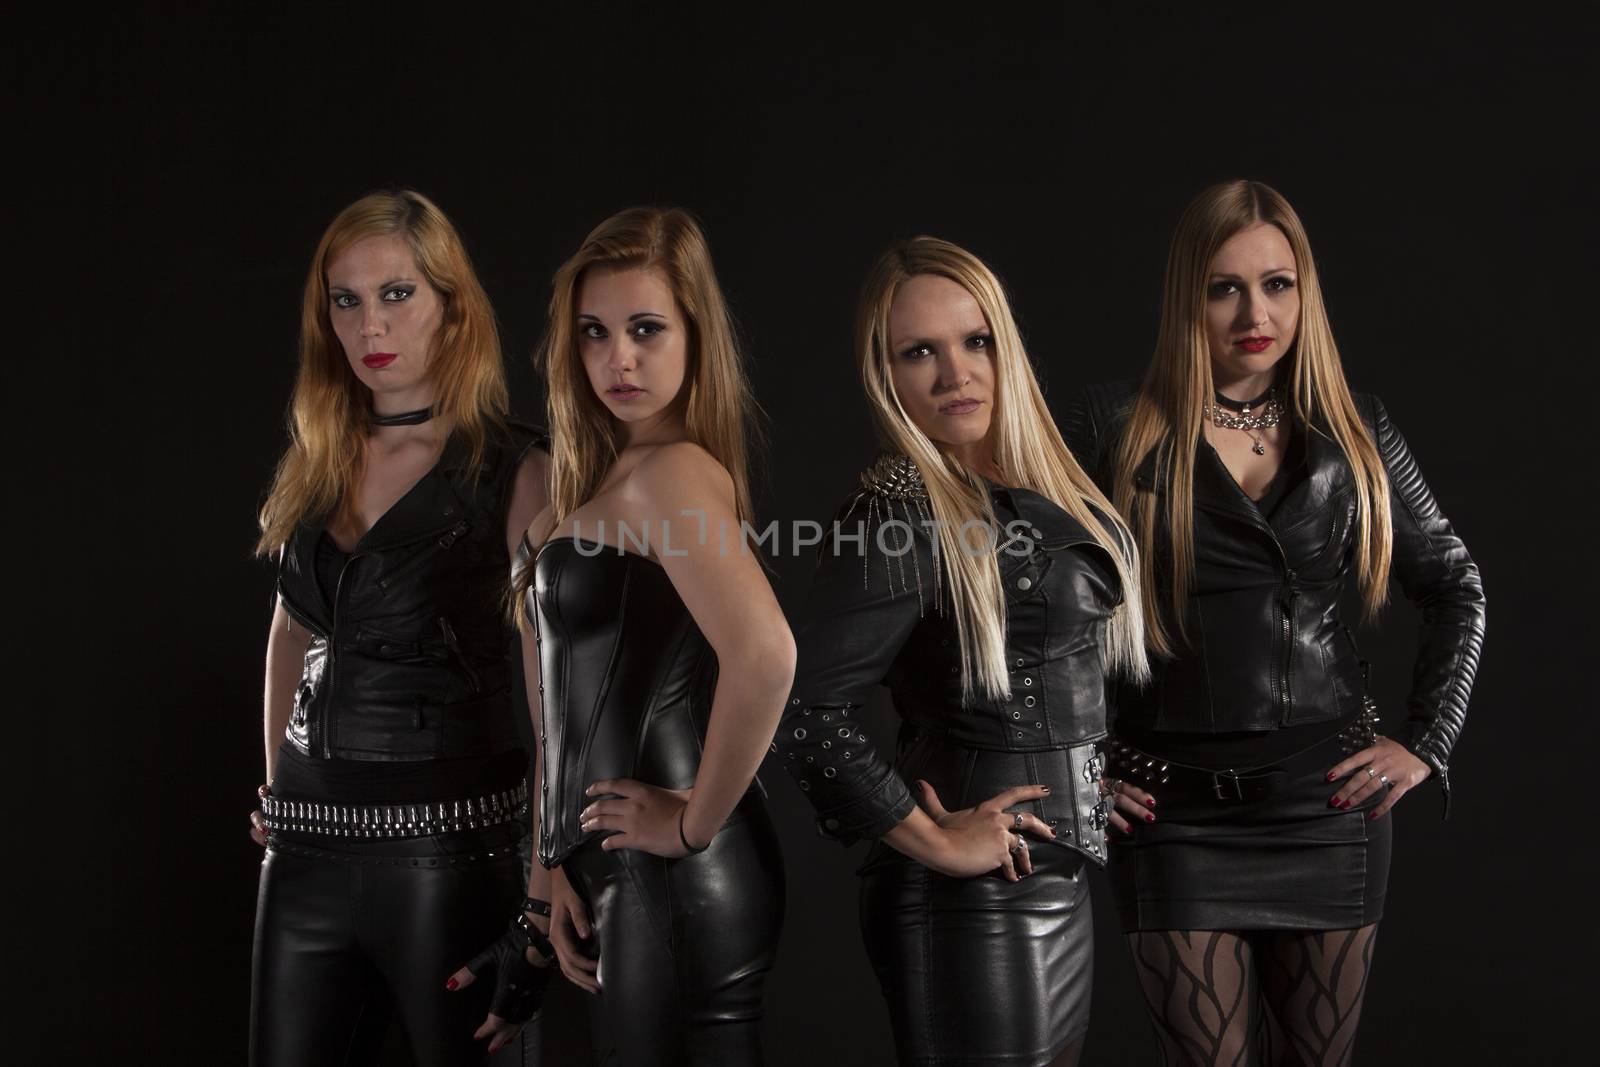 Group of young women wearing leather outfits by Aarstudio